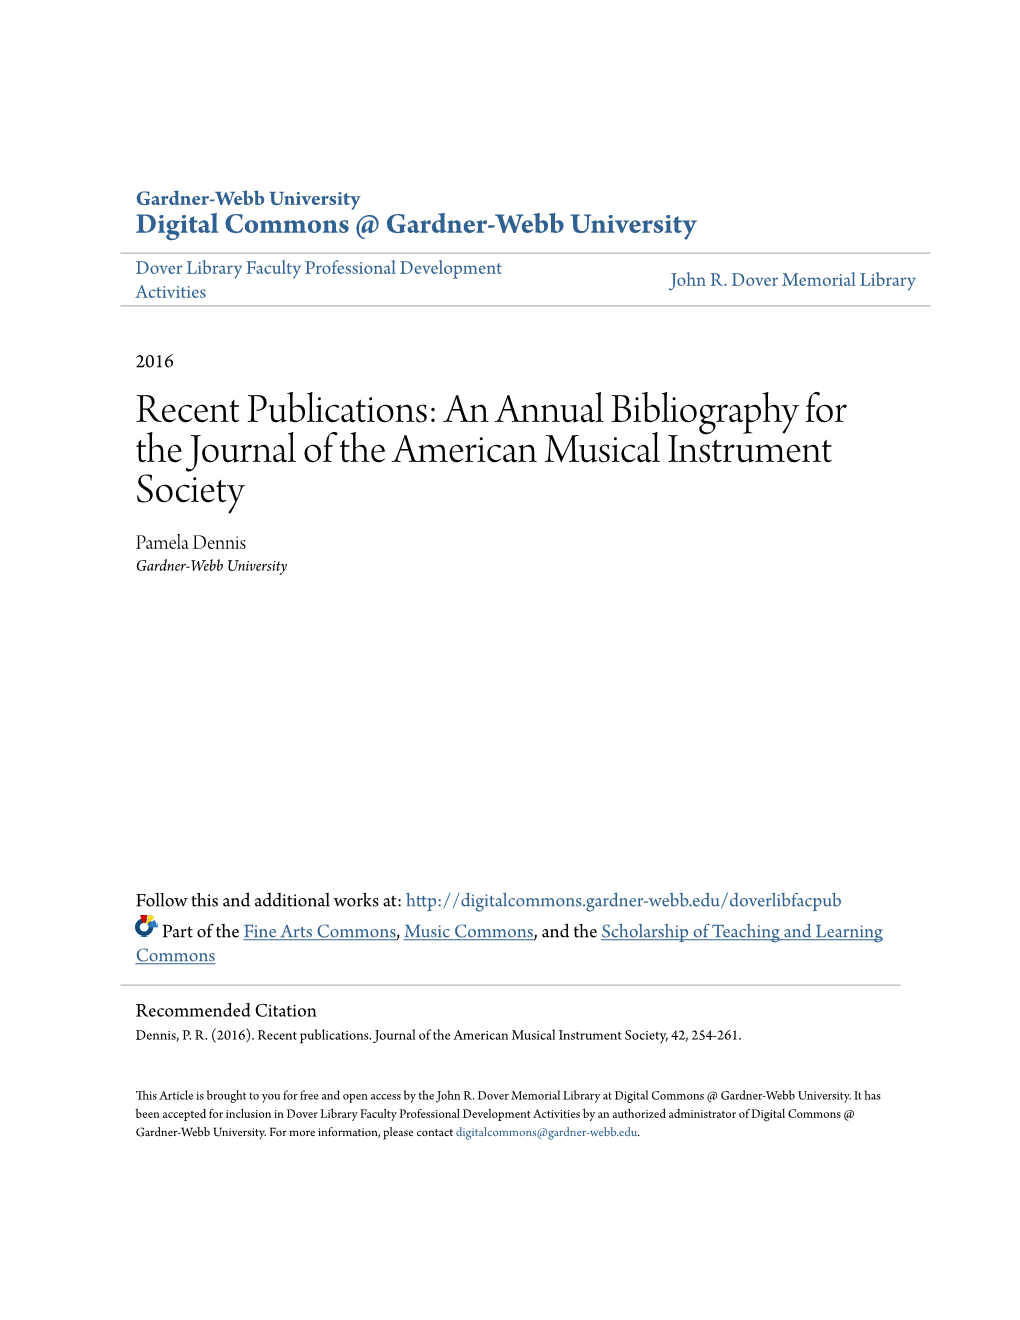 An Annual Bibliography for the Journal of the American Musical Instrument Society Pamela Dennis Gardner-Webb University